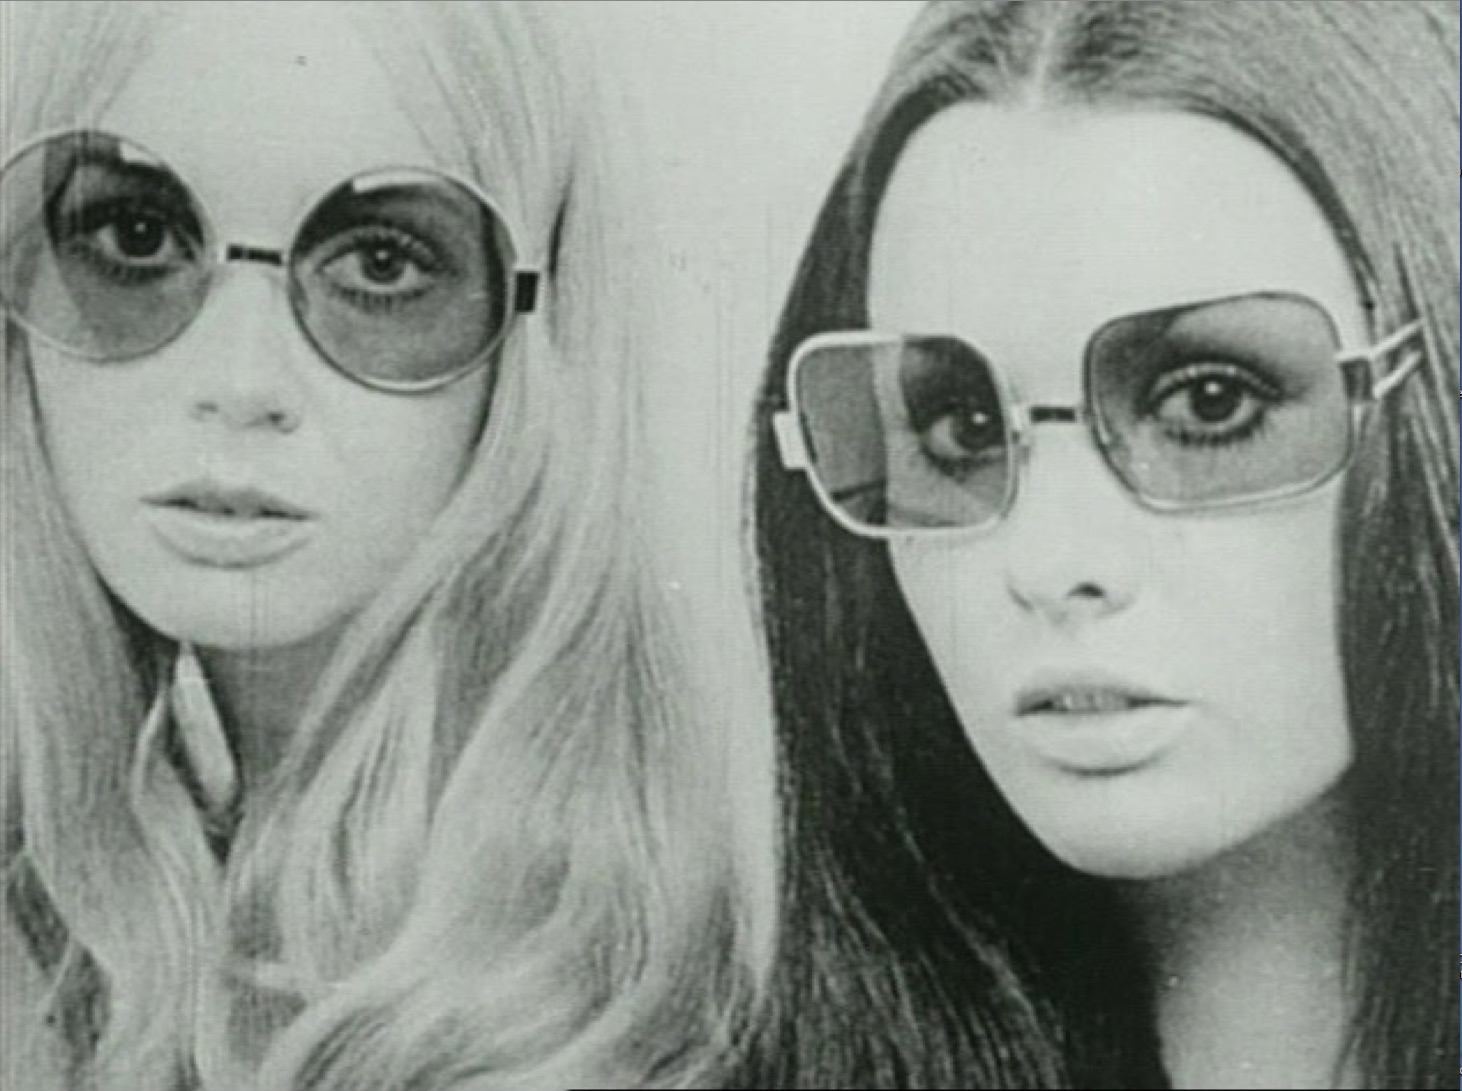 Still image from the 1971 documentary Growing Up Female by Julia Reichert and Jim Klein